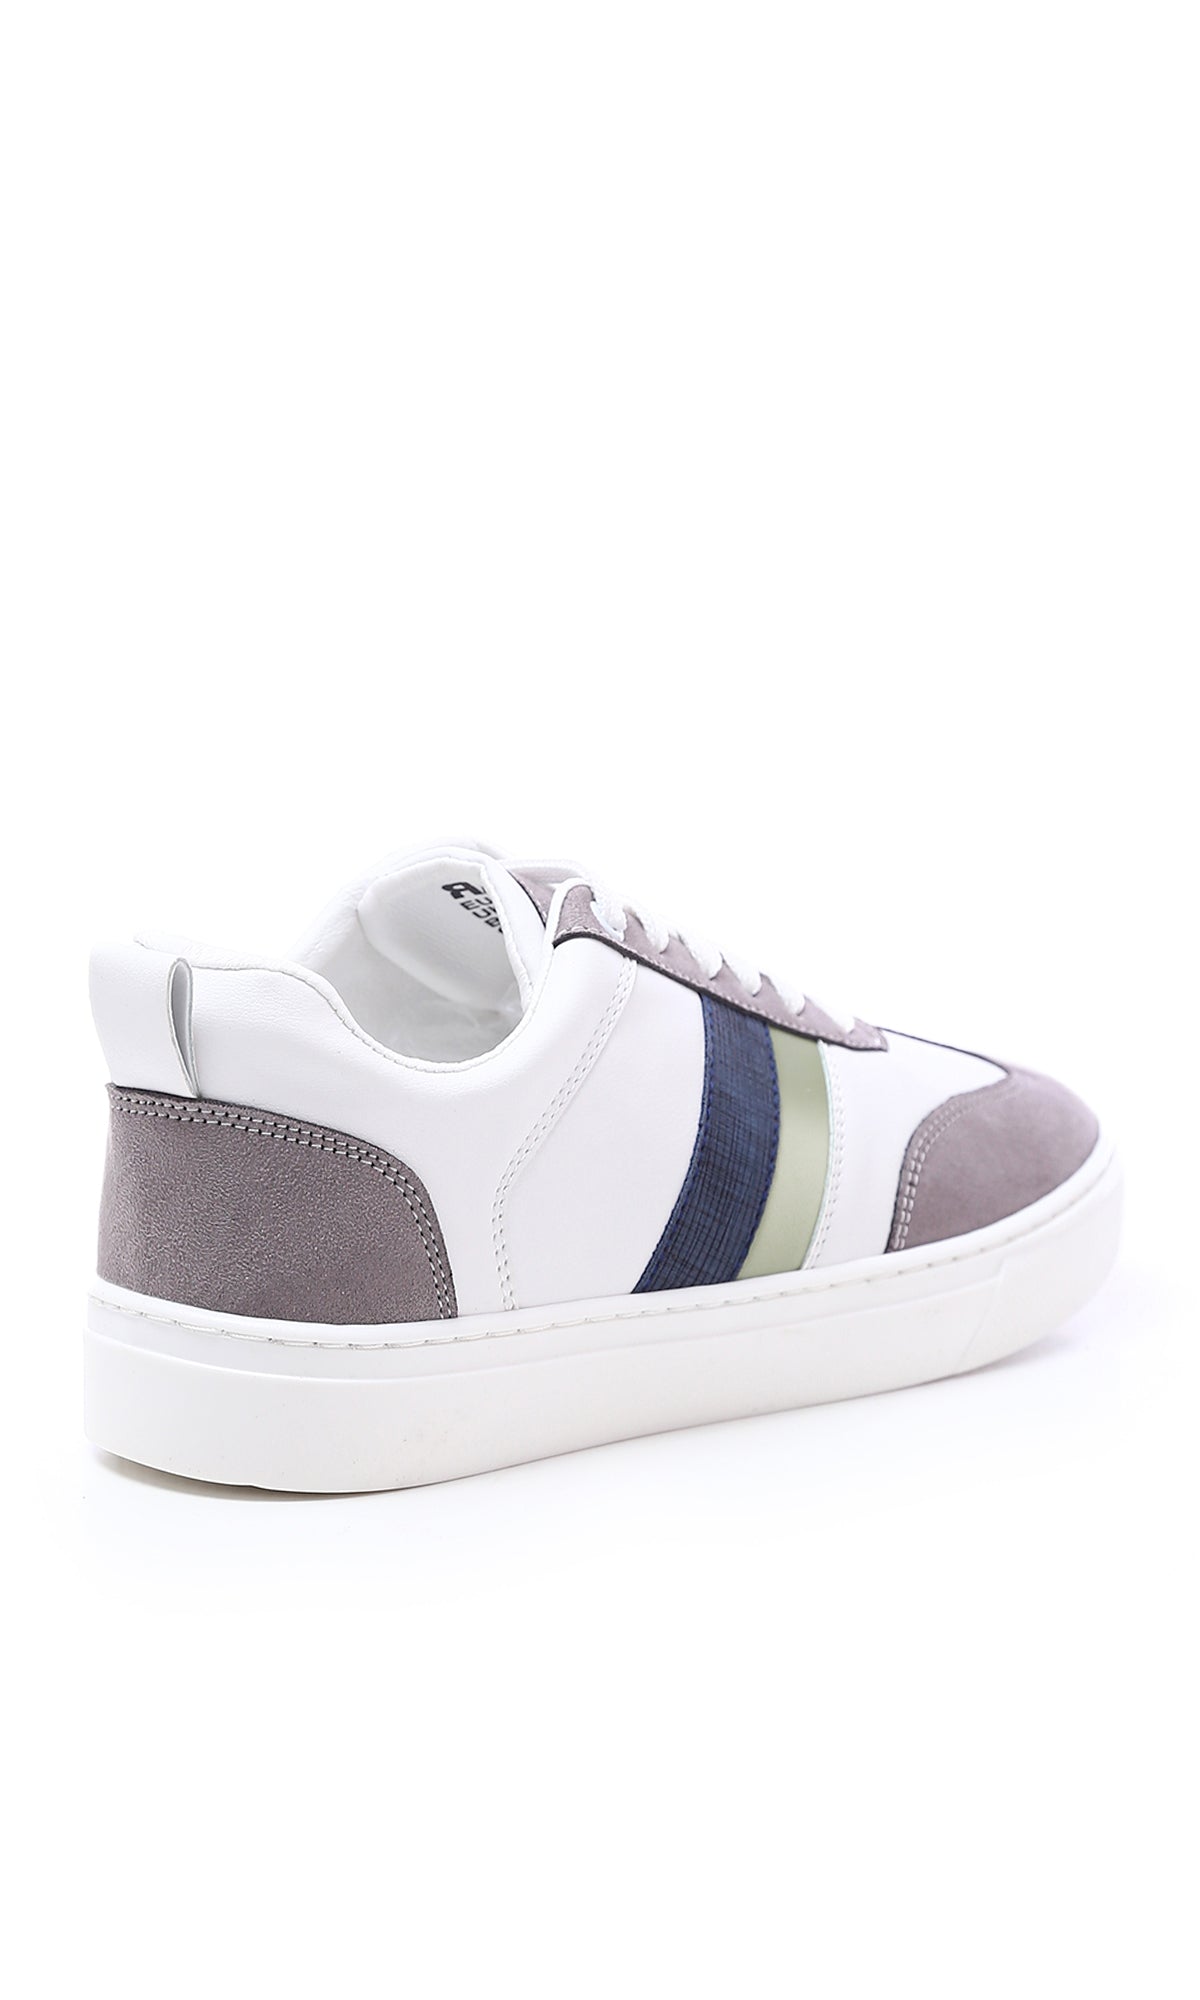 O176721 Round Toecap Lace Up Casual Shoes - White, Green & Grey